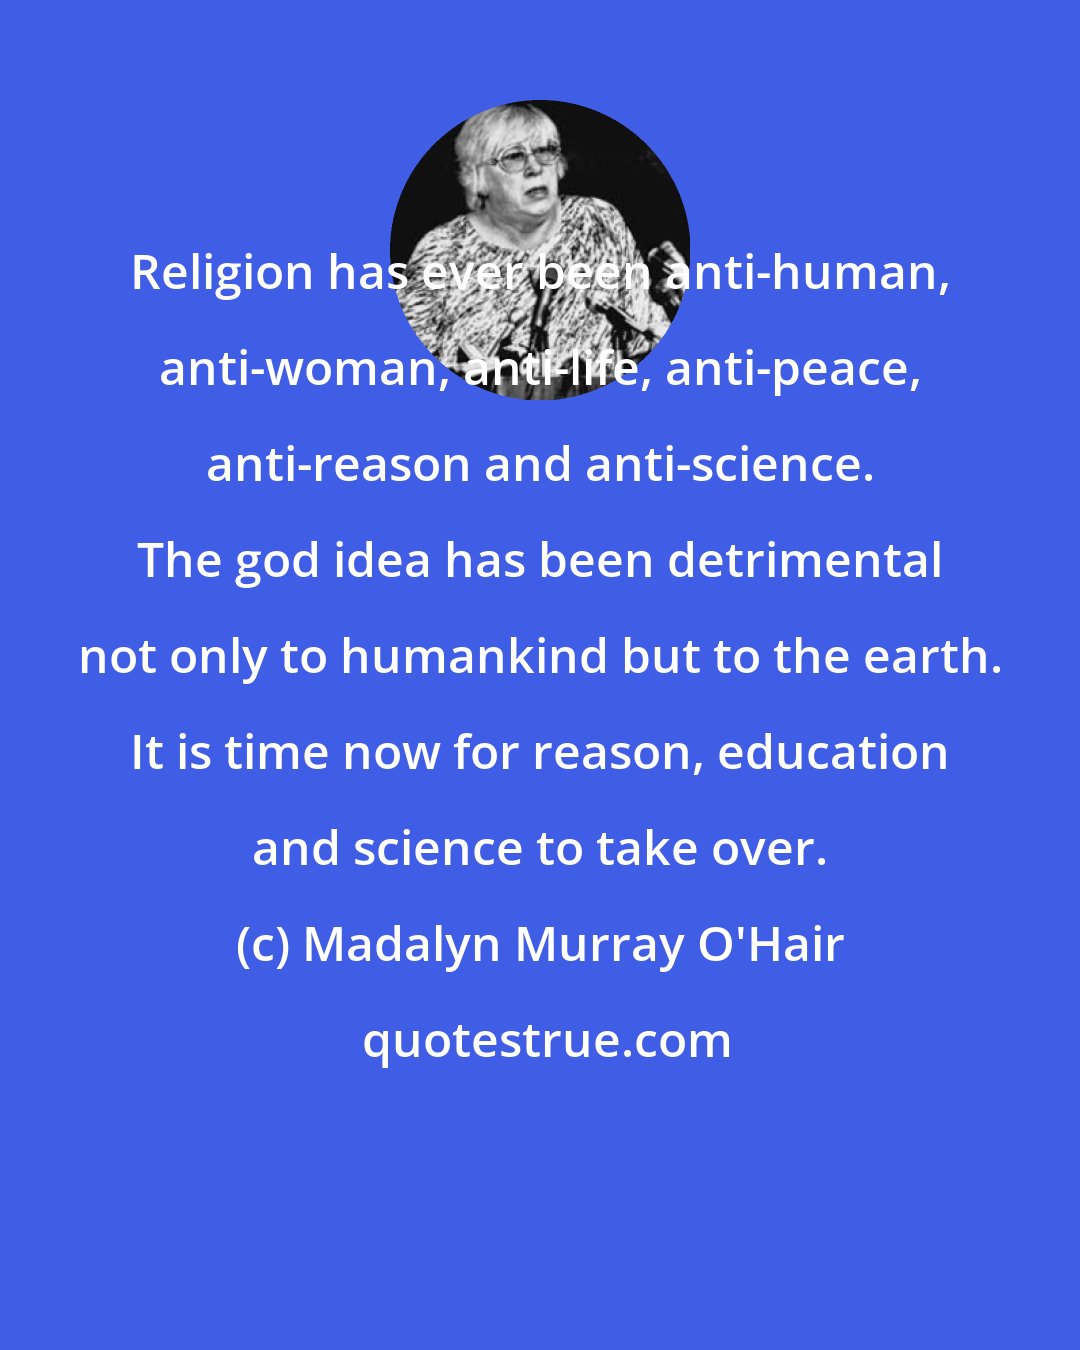 Madalyn Murray O'Hair: Religion has ever been anti-human, anti-woman, anti-life, anti-peace, anti-reason and anti-science. The god idea has been detrimental not only to humankind but to the earth. It is time now for reason, education and science to take over.